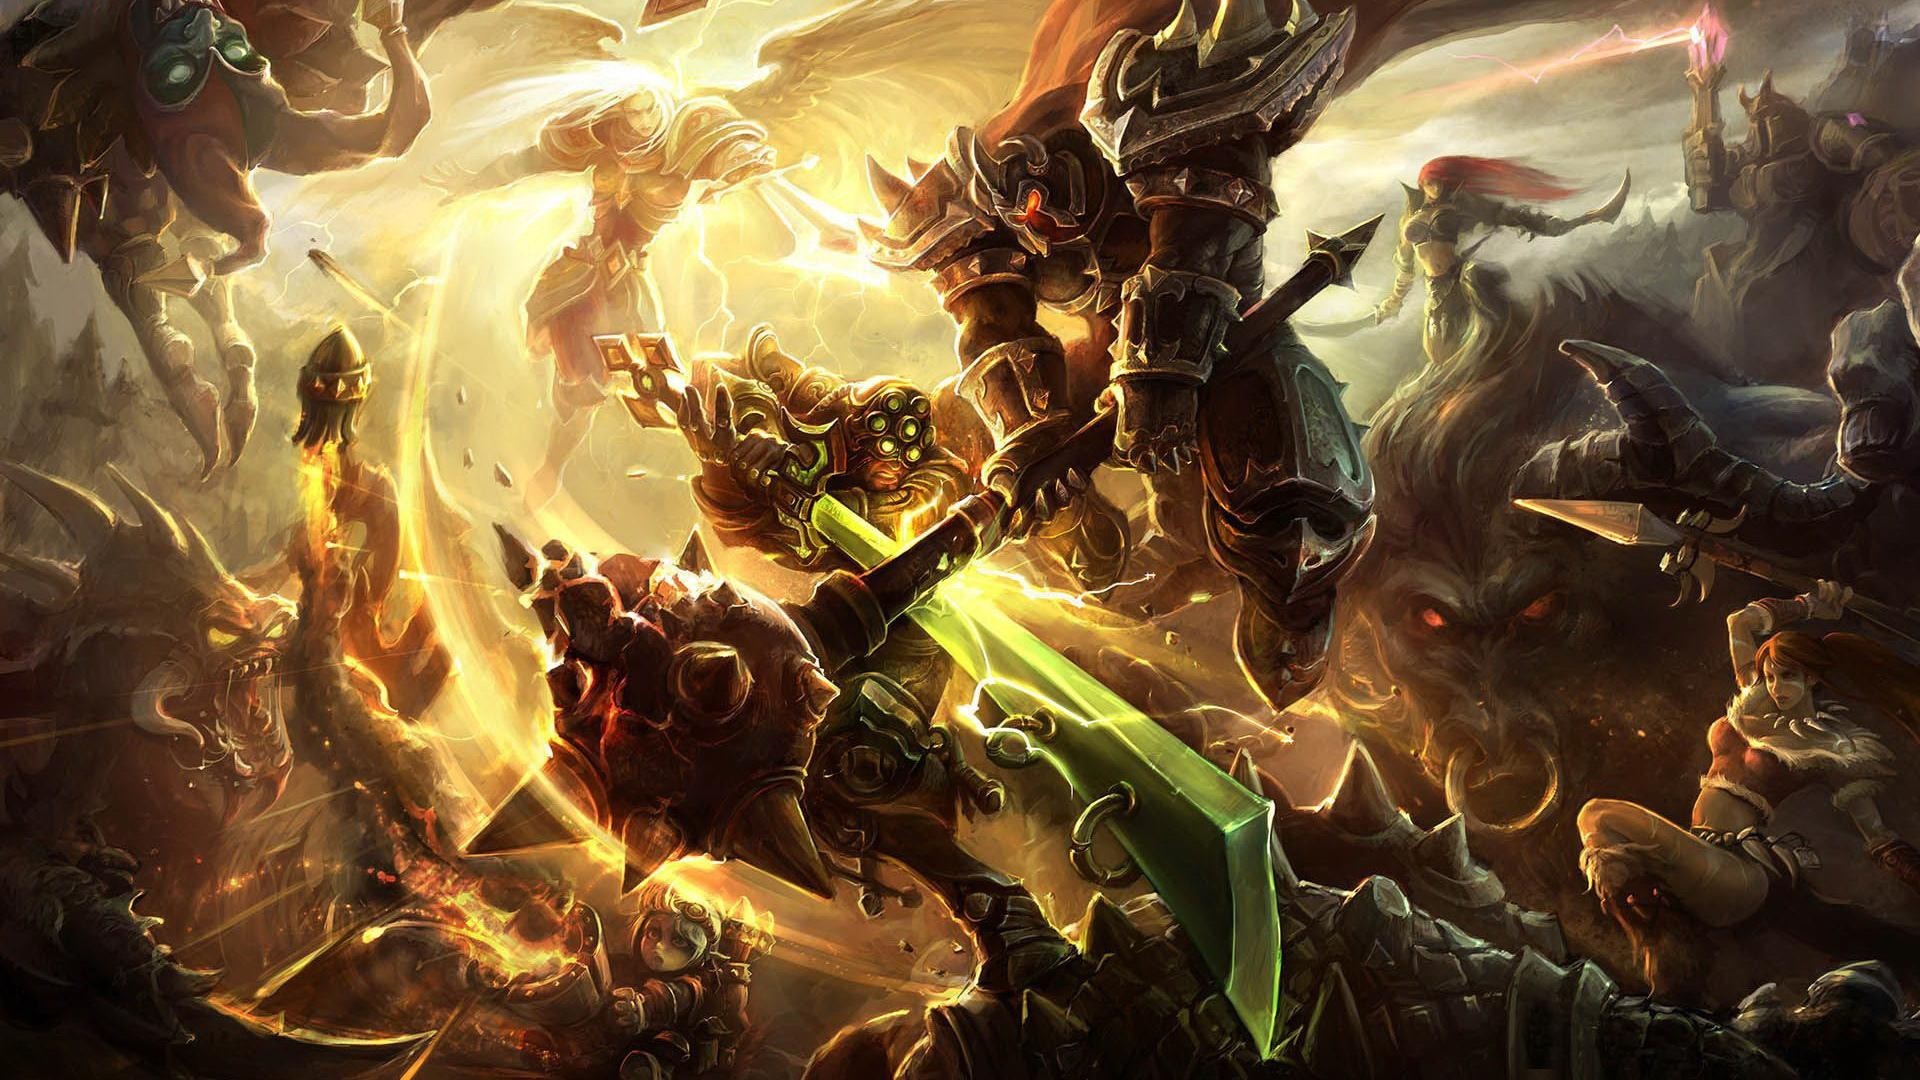 General 1920x1080 League of Legends PC gaming fantasy art video game art